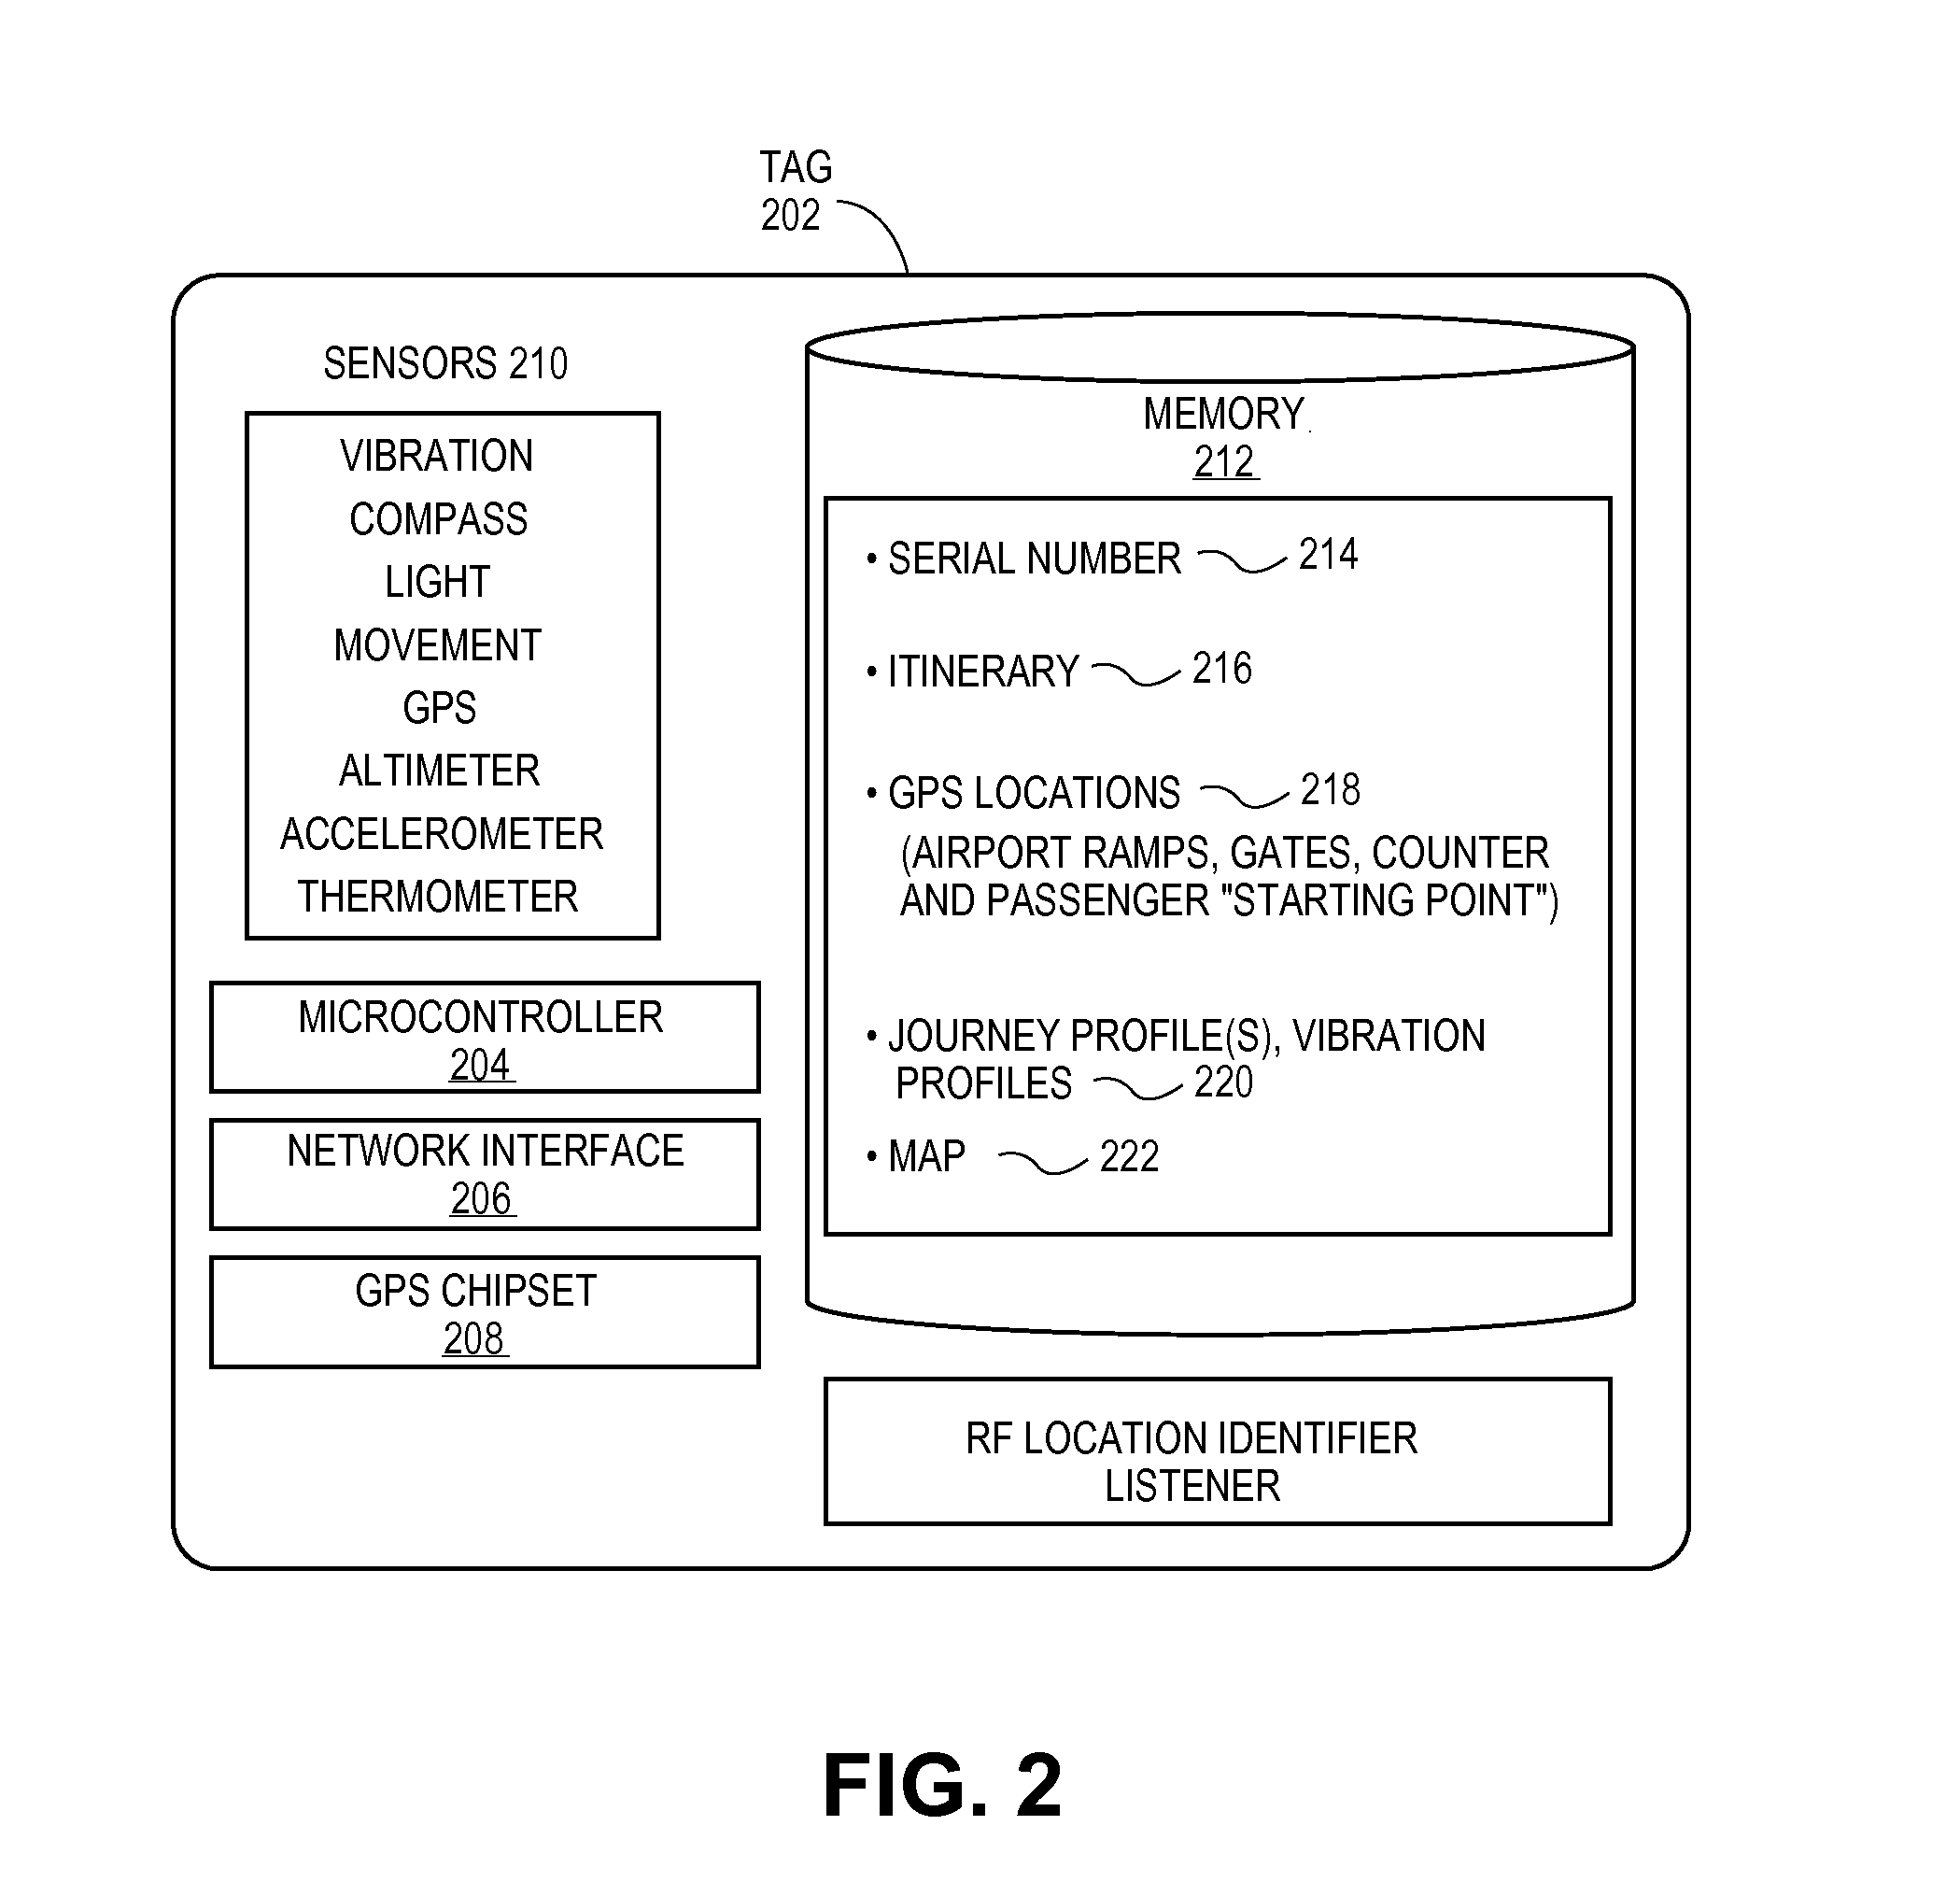 Methods and systems for gps-enabled baggage tags